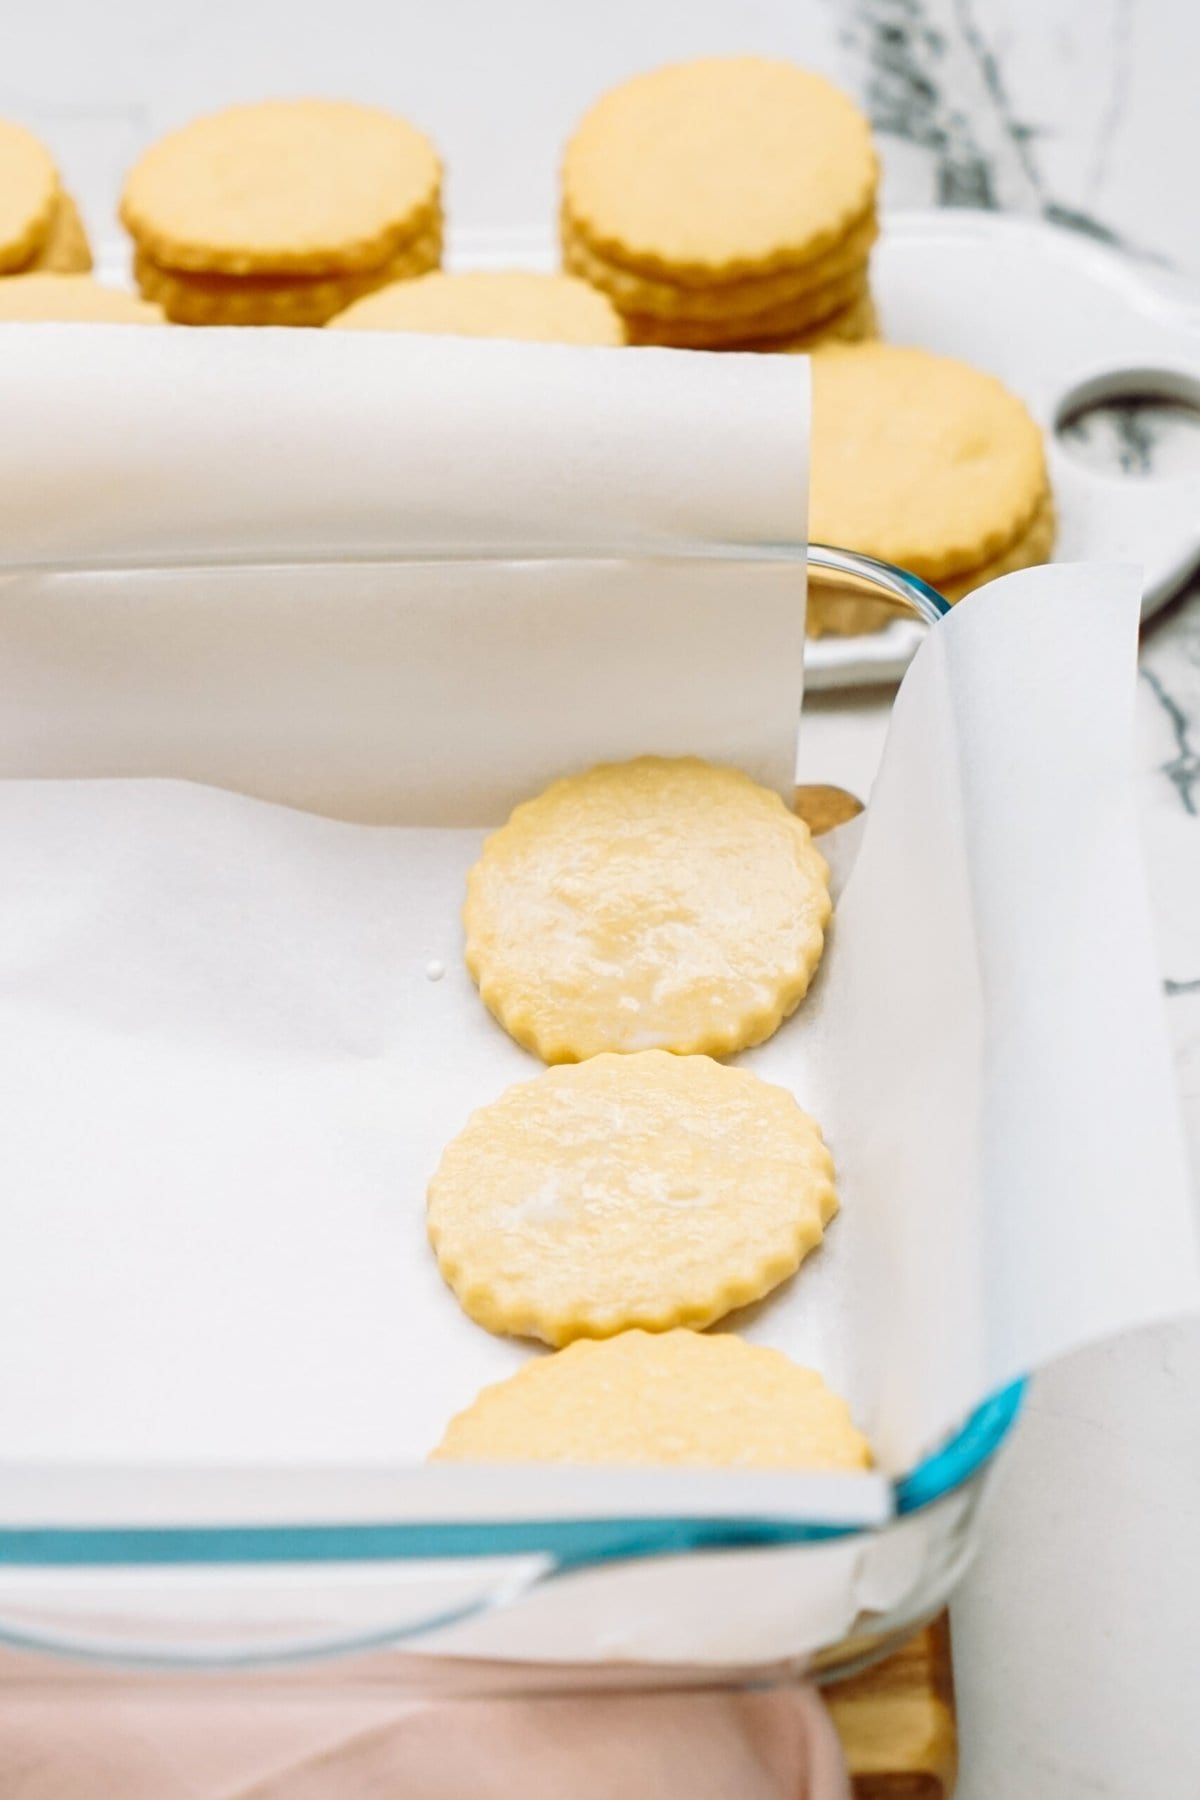 Shortbread cookies on parchment paper in a metal baking tray.